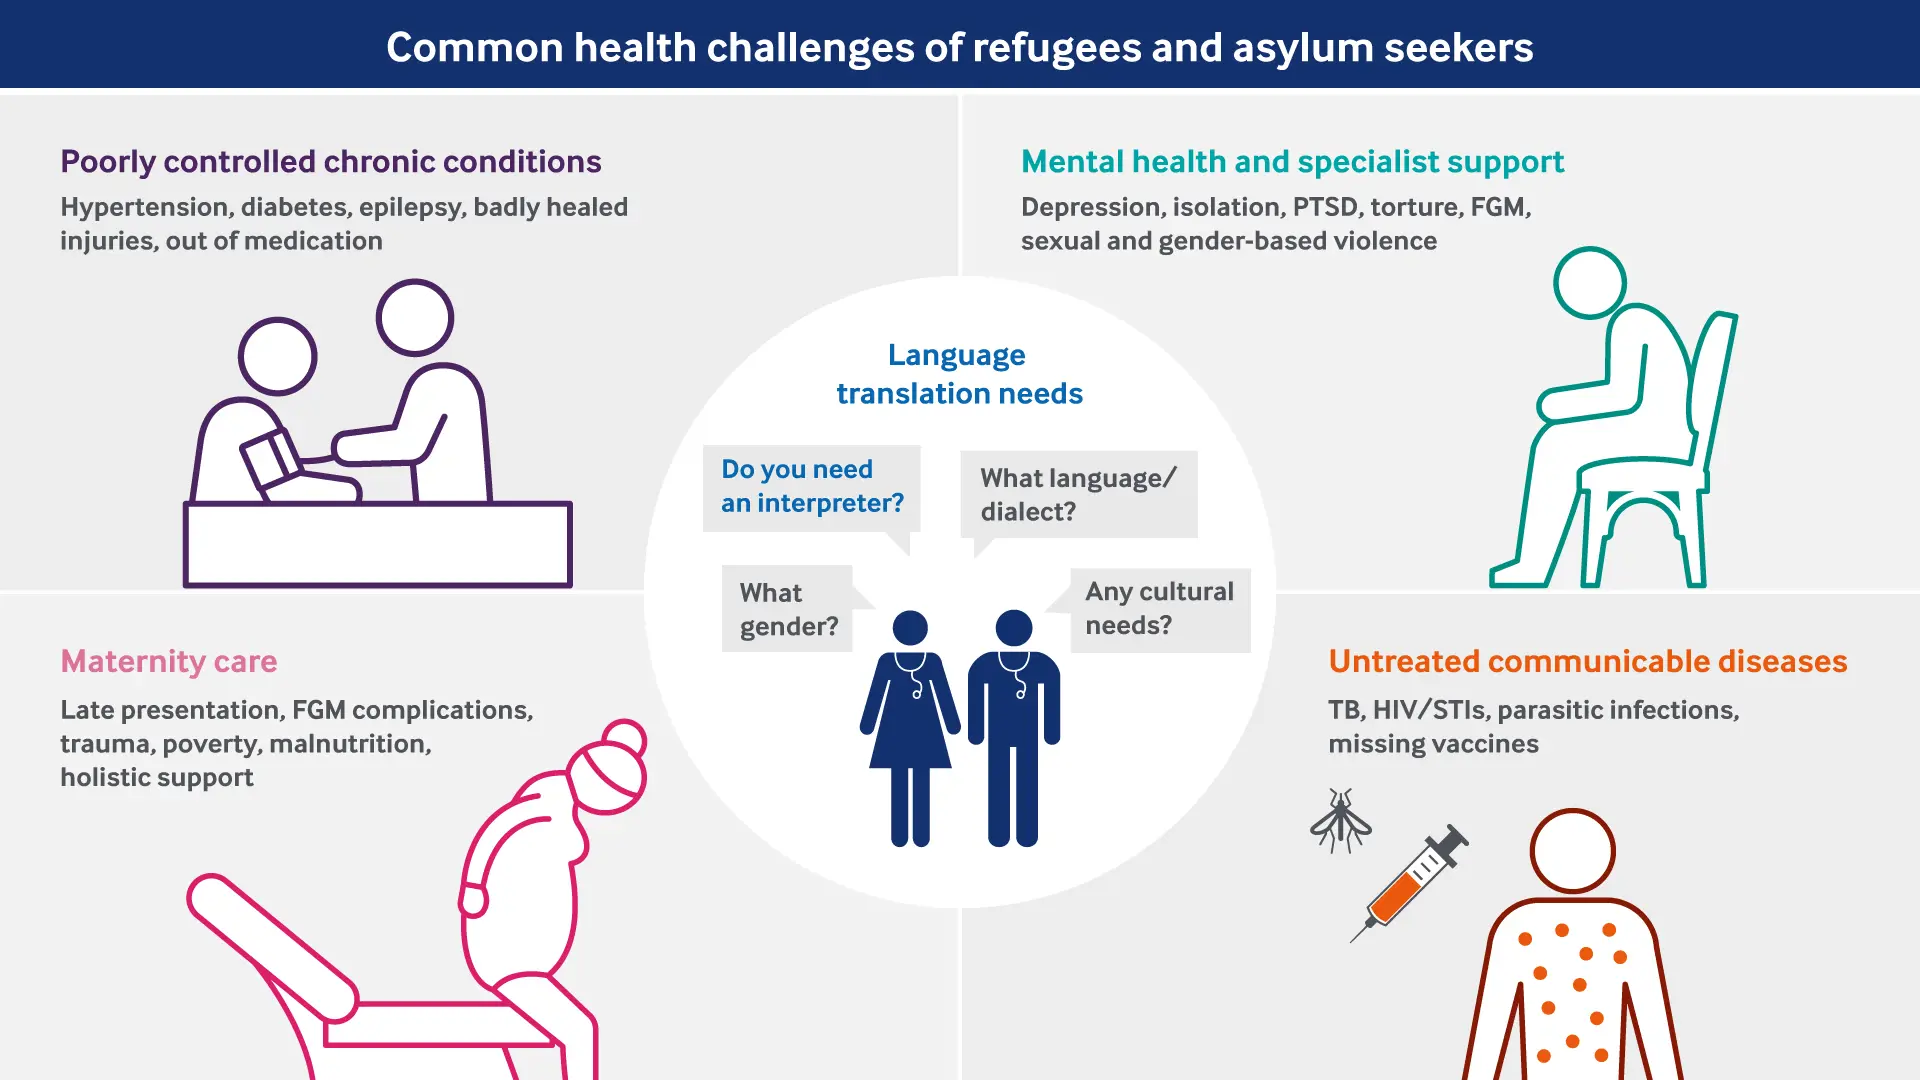 Infographic showing the common health challenges of refugees